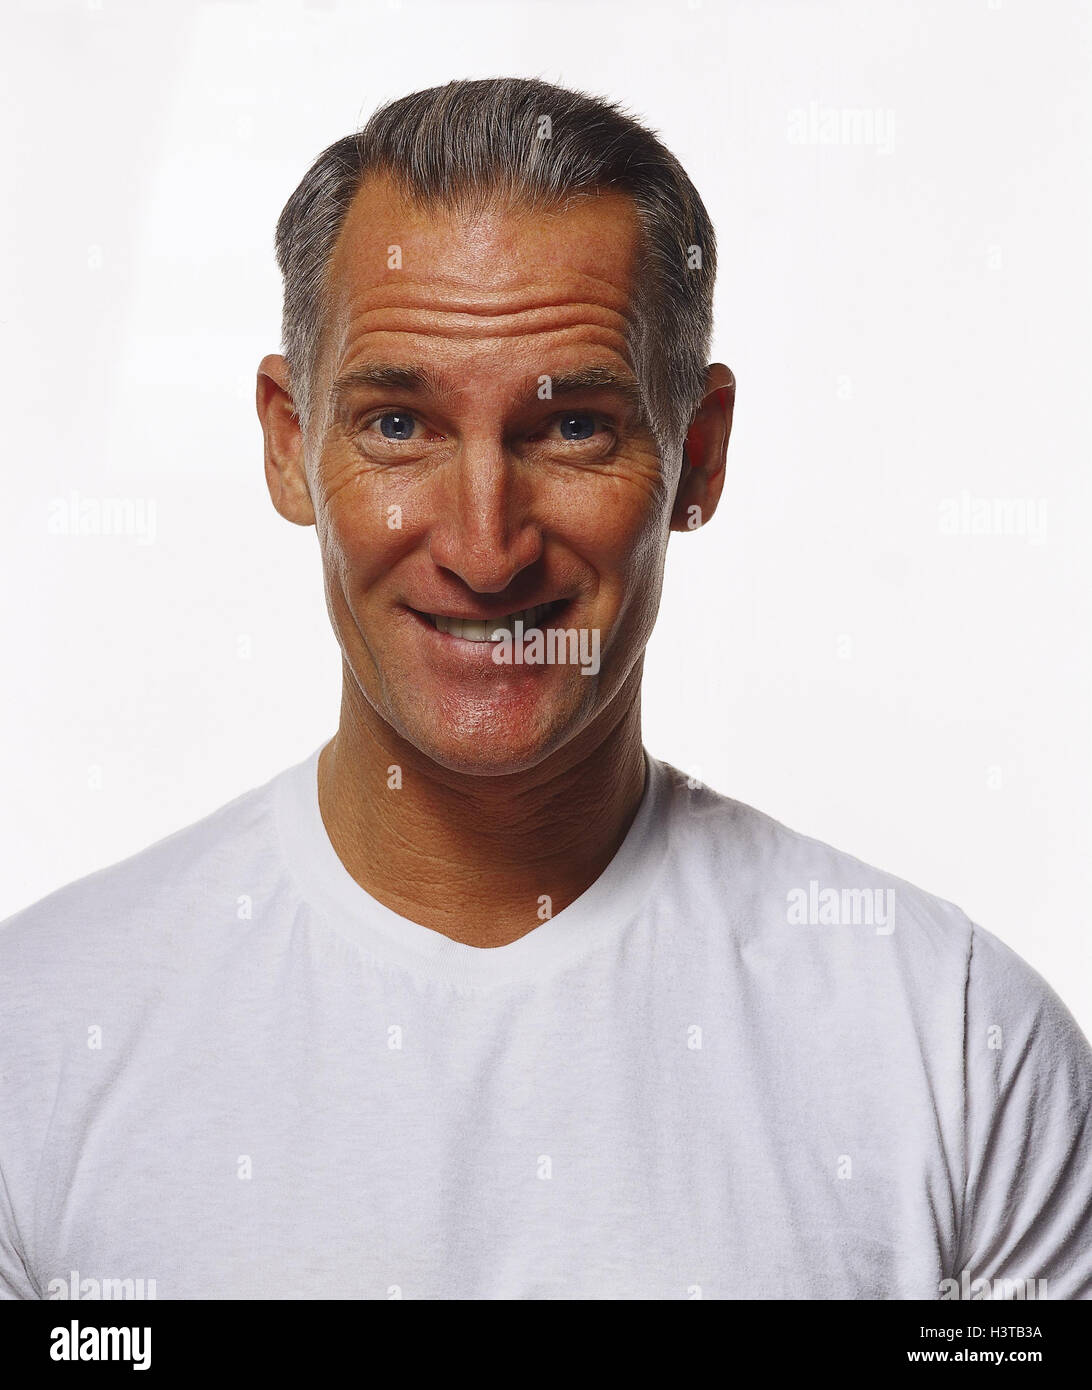 Man, middle old person, T-shirt, white, smile, portrait, man's portrait, forehead, wrinkle, grin, unnerves interrogatorily, happy, cut out, Stock Photo